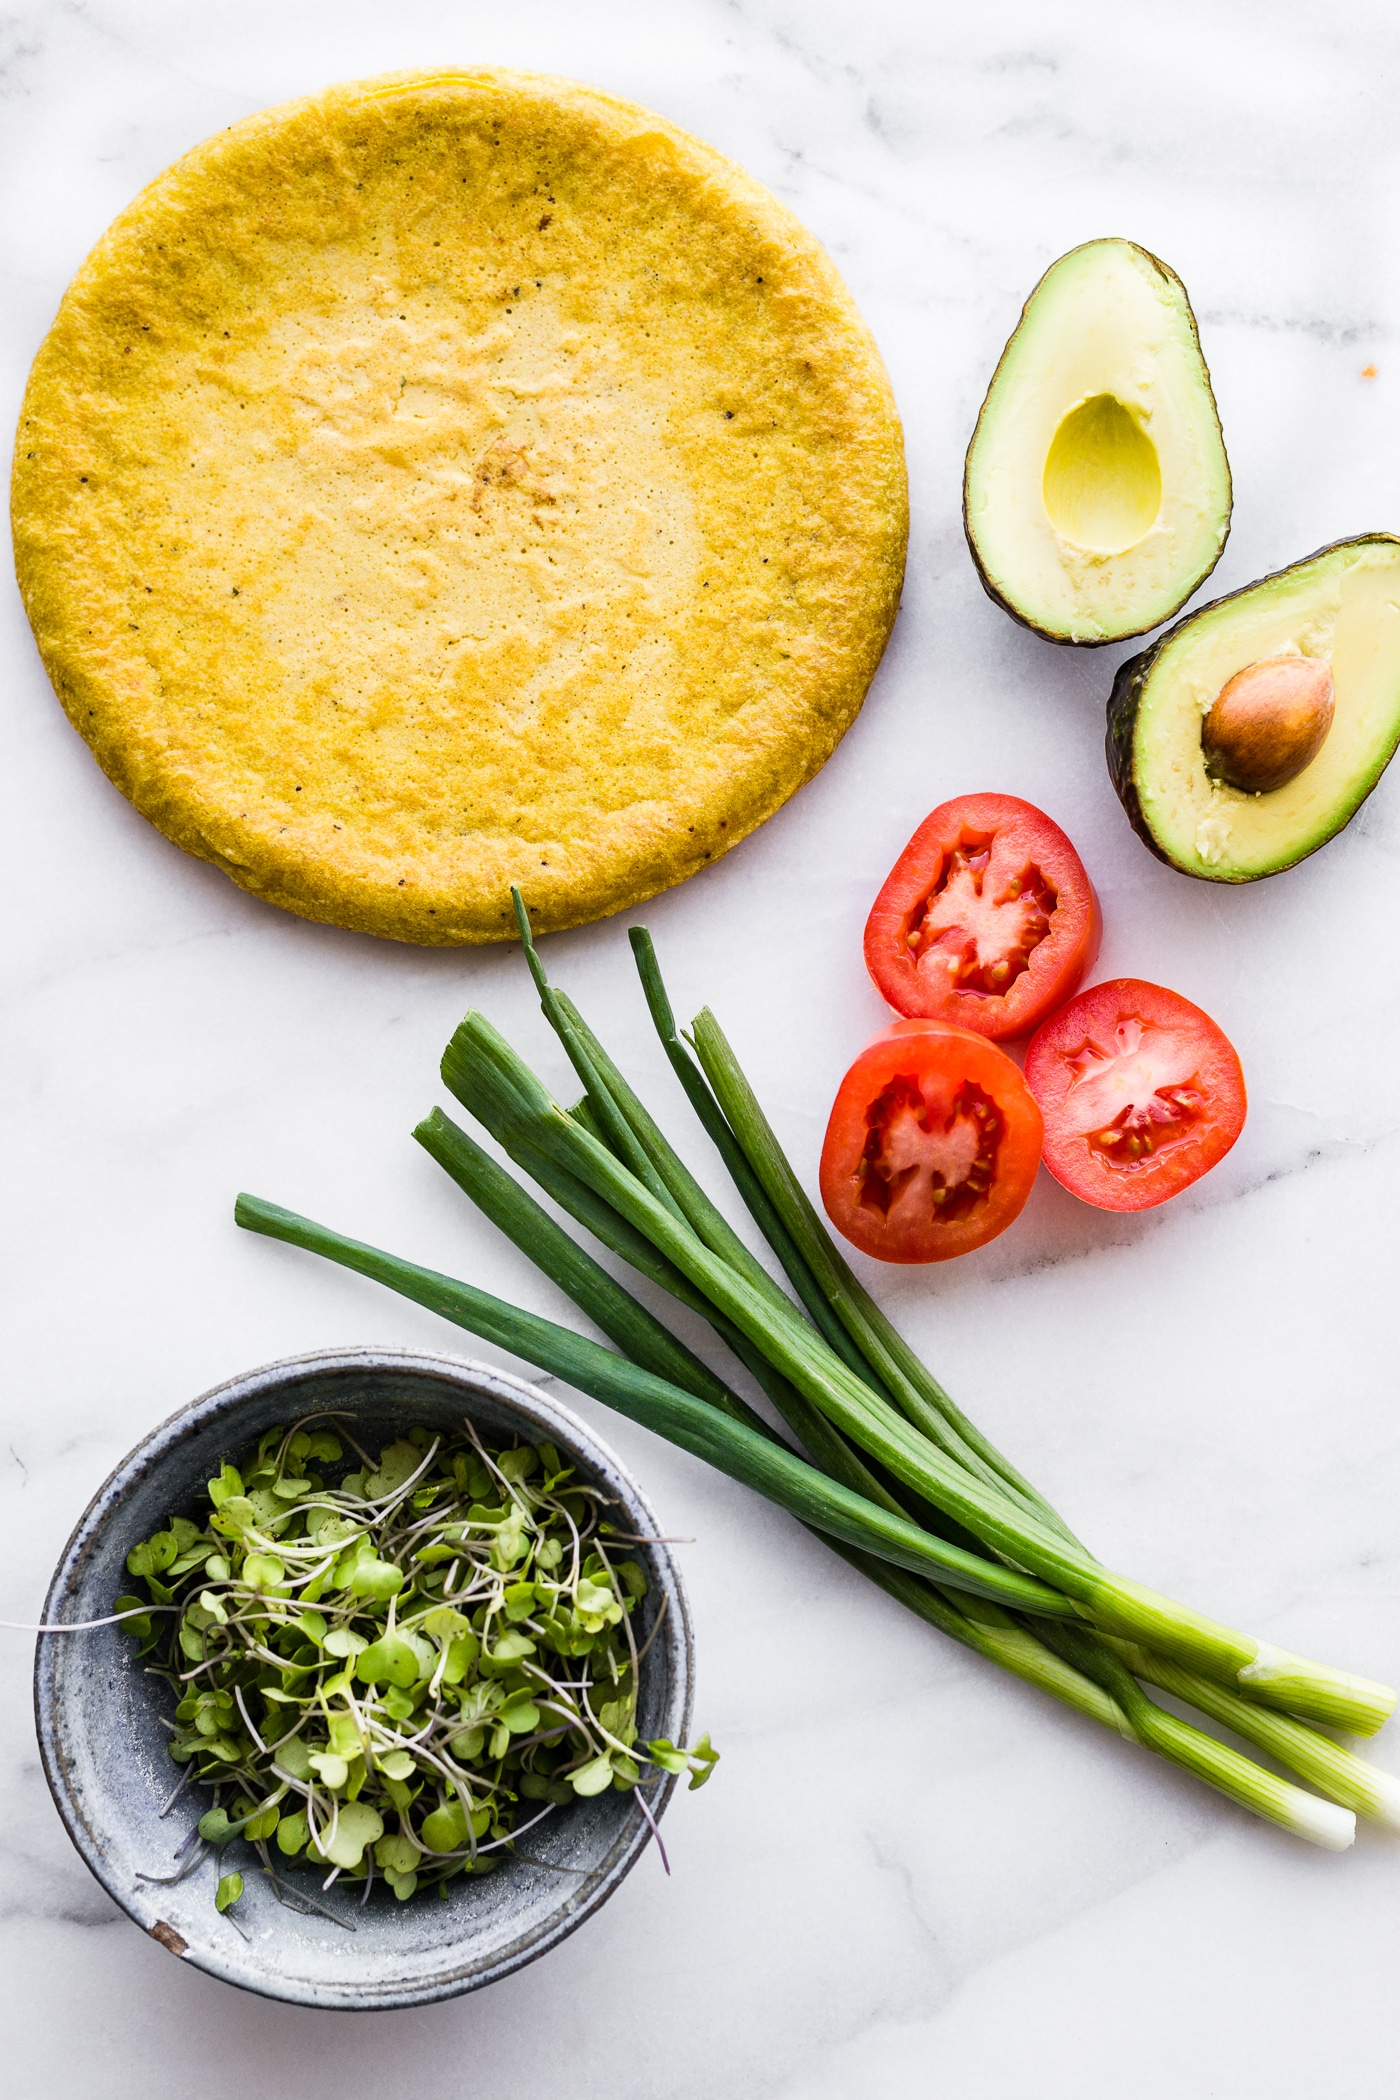 Avocado Tomato Gouda Socca Pizza recipe to love! A grain free, gluten free Avocado Tomato Gouda Socca Pizza made with chickpea flour and topped with Avocado, Gouda, Tomato, and Greens! Seriously easy to make, egg free, vegan option, OMG delicious!